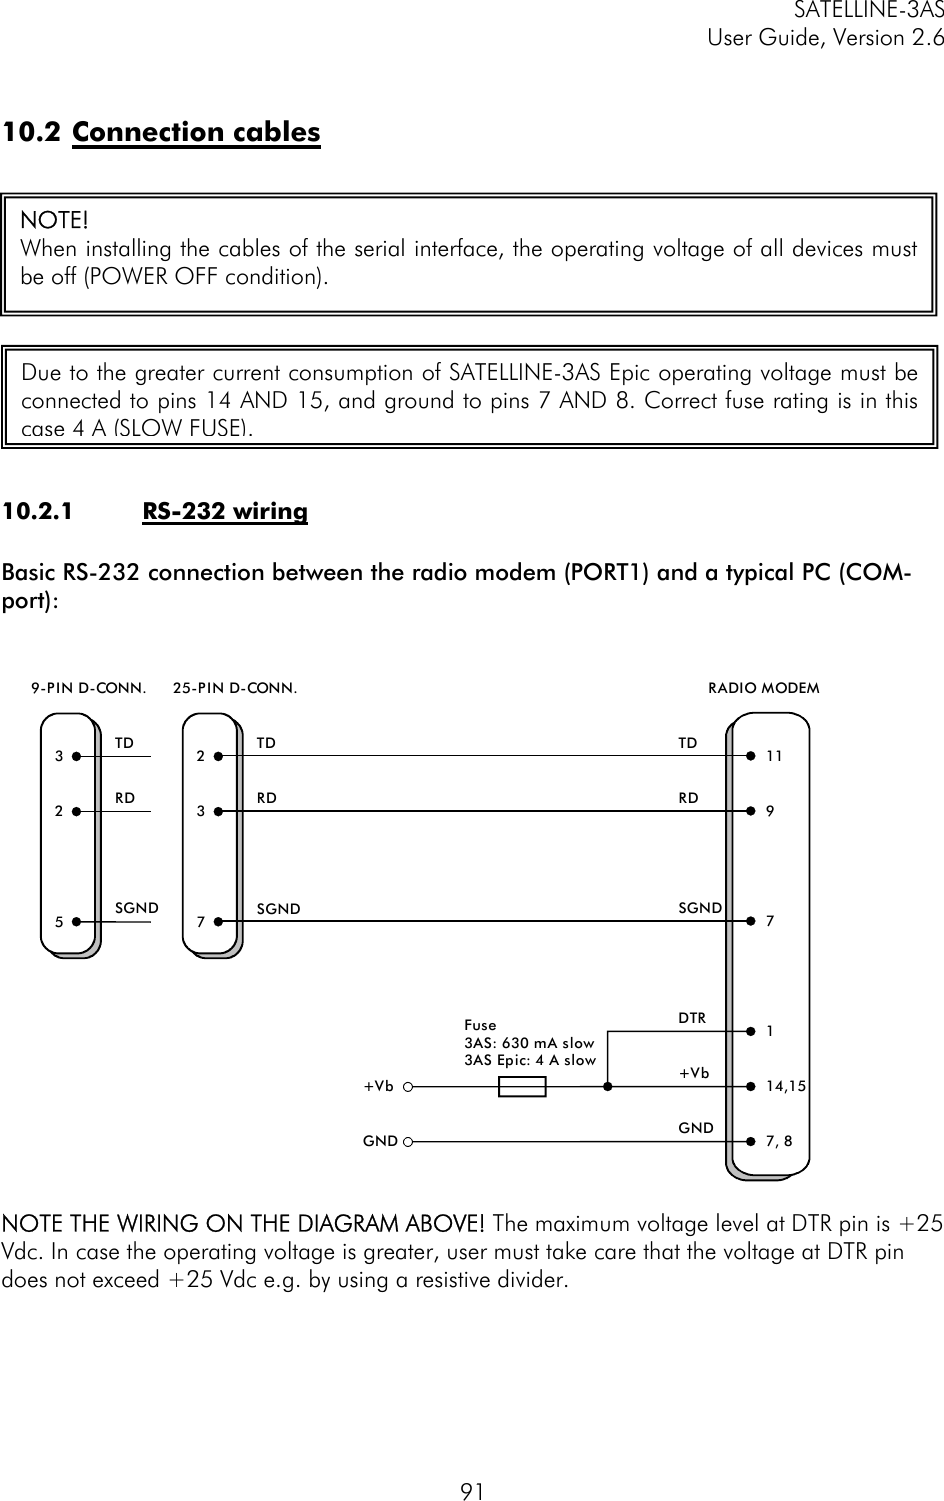 SATELLINE-3AS User Guide, Version 2.6   91  10.2 Connection cables    10.2.1 RS-232 wiring   Basic RS-232 connection between the radio modem (PORT1) and a typical PC (COM-port):    NOTE THE WIRING ON THE DIAGRAM ABOVE! The maximum voltage level at DTR pin is +25 Vdc. In case the operating voltage is greater, user must take care that the voltage at DTR pin does not exceed +25 Vdc e.g. by using a resistive divider.NOTE!  When installing the cables of the serial interface, the operating voltage of all devices must be off (POWER OFF condition).  Due to the greater current consumption of SATELLINE-3AS Epic operating voltage must be connected to pins 14 AND 15, and ground to pins 7 AND 8. Correct fuse rating is in this case 4 A (SLOW FUSE). 325TDRDSGND9-PIN D-CONN.237TDRDSGND25-PIN D-CONN.TDRDSGND11RADIO MODEM97114,157, 8DTR+VbGND+VbGNDFuse 3AS: 630 mA slow3AS Epic: 4 A slow